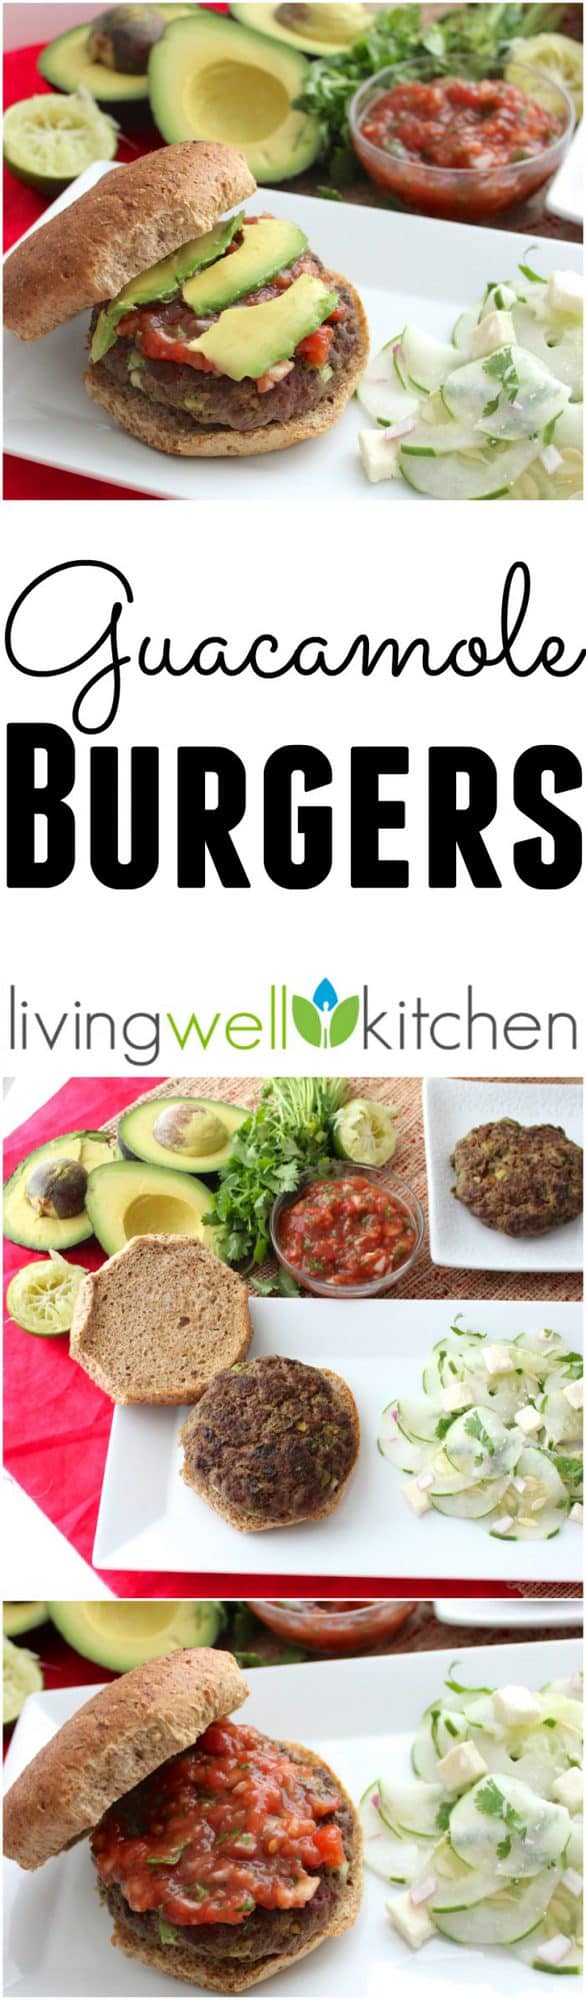 Guacamole + ground beef makes a fun, nutritious alternative to your typical burger This healthy recipe is full of vitamins, minerals, and flavor. Great gluten free, dairy free dinner idea. (sponsored)